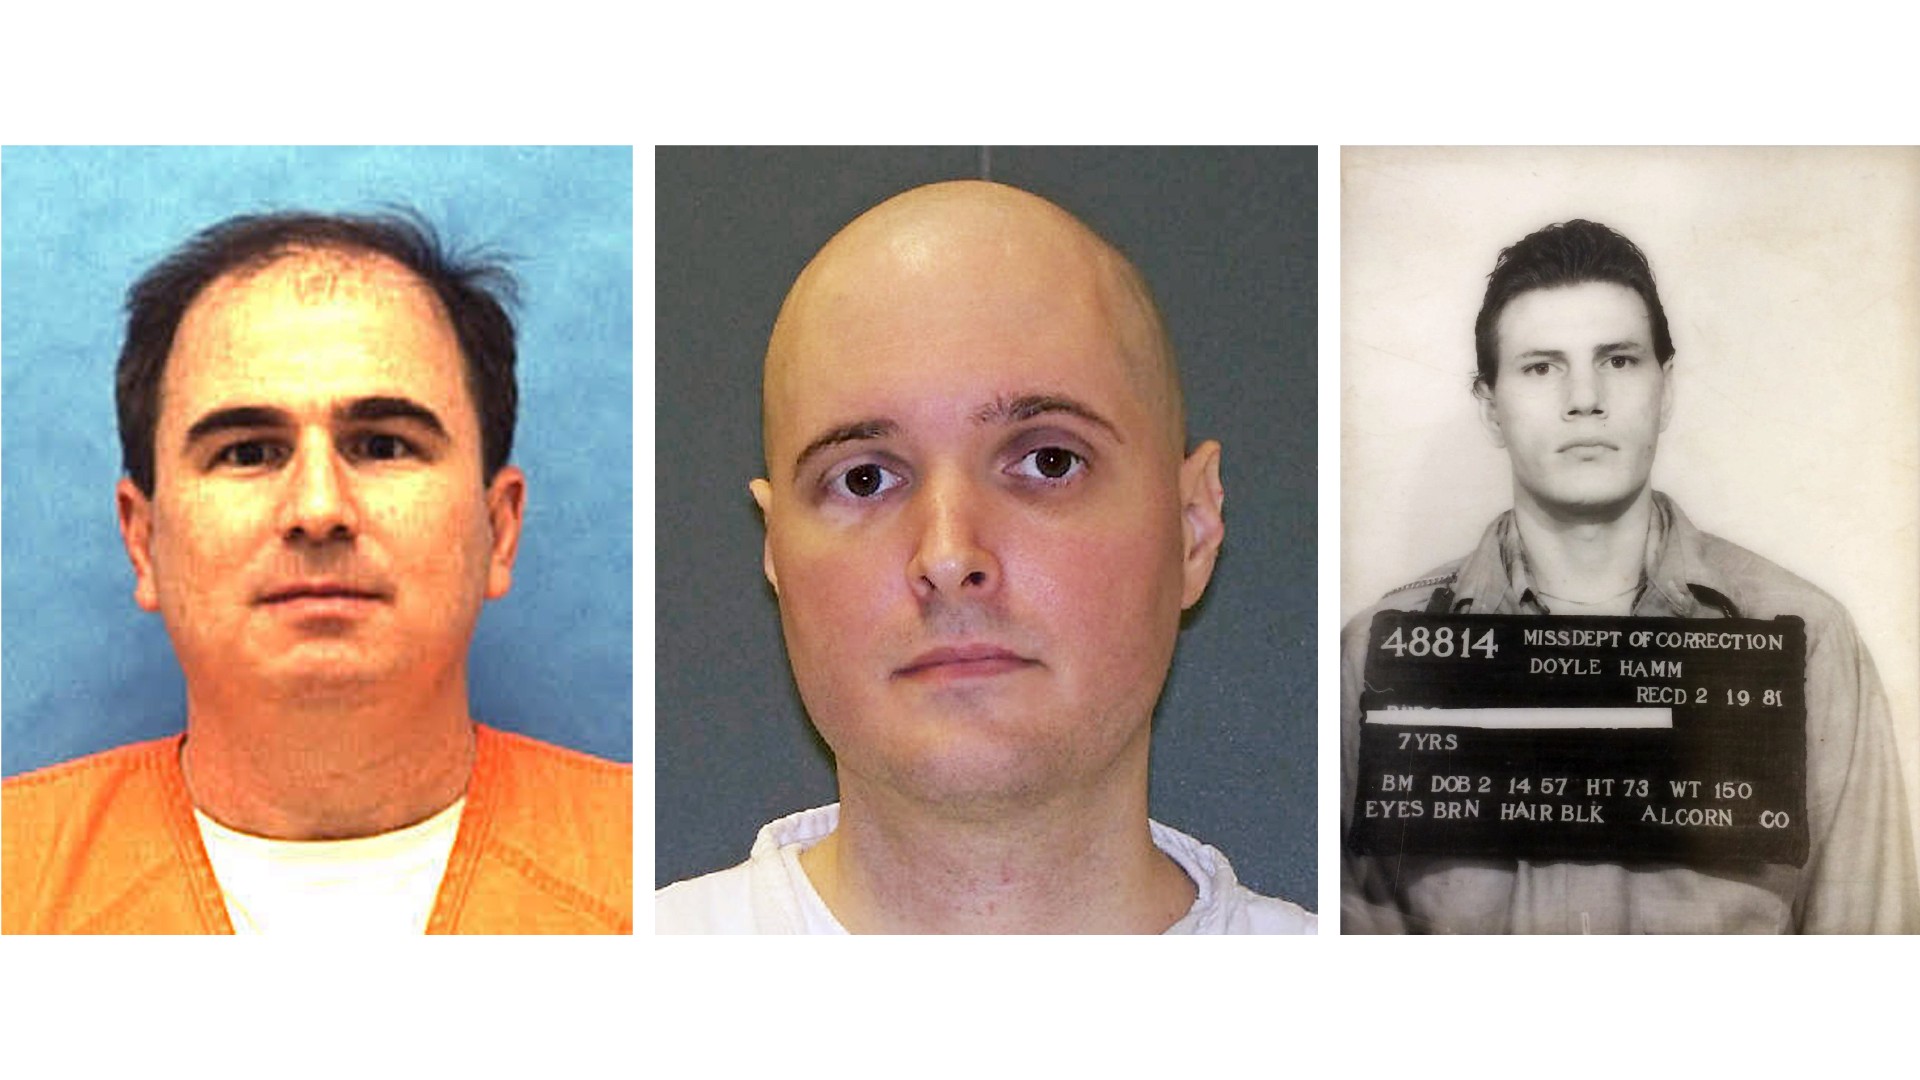 These 3 men are all scheduled to be executed tonight